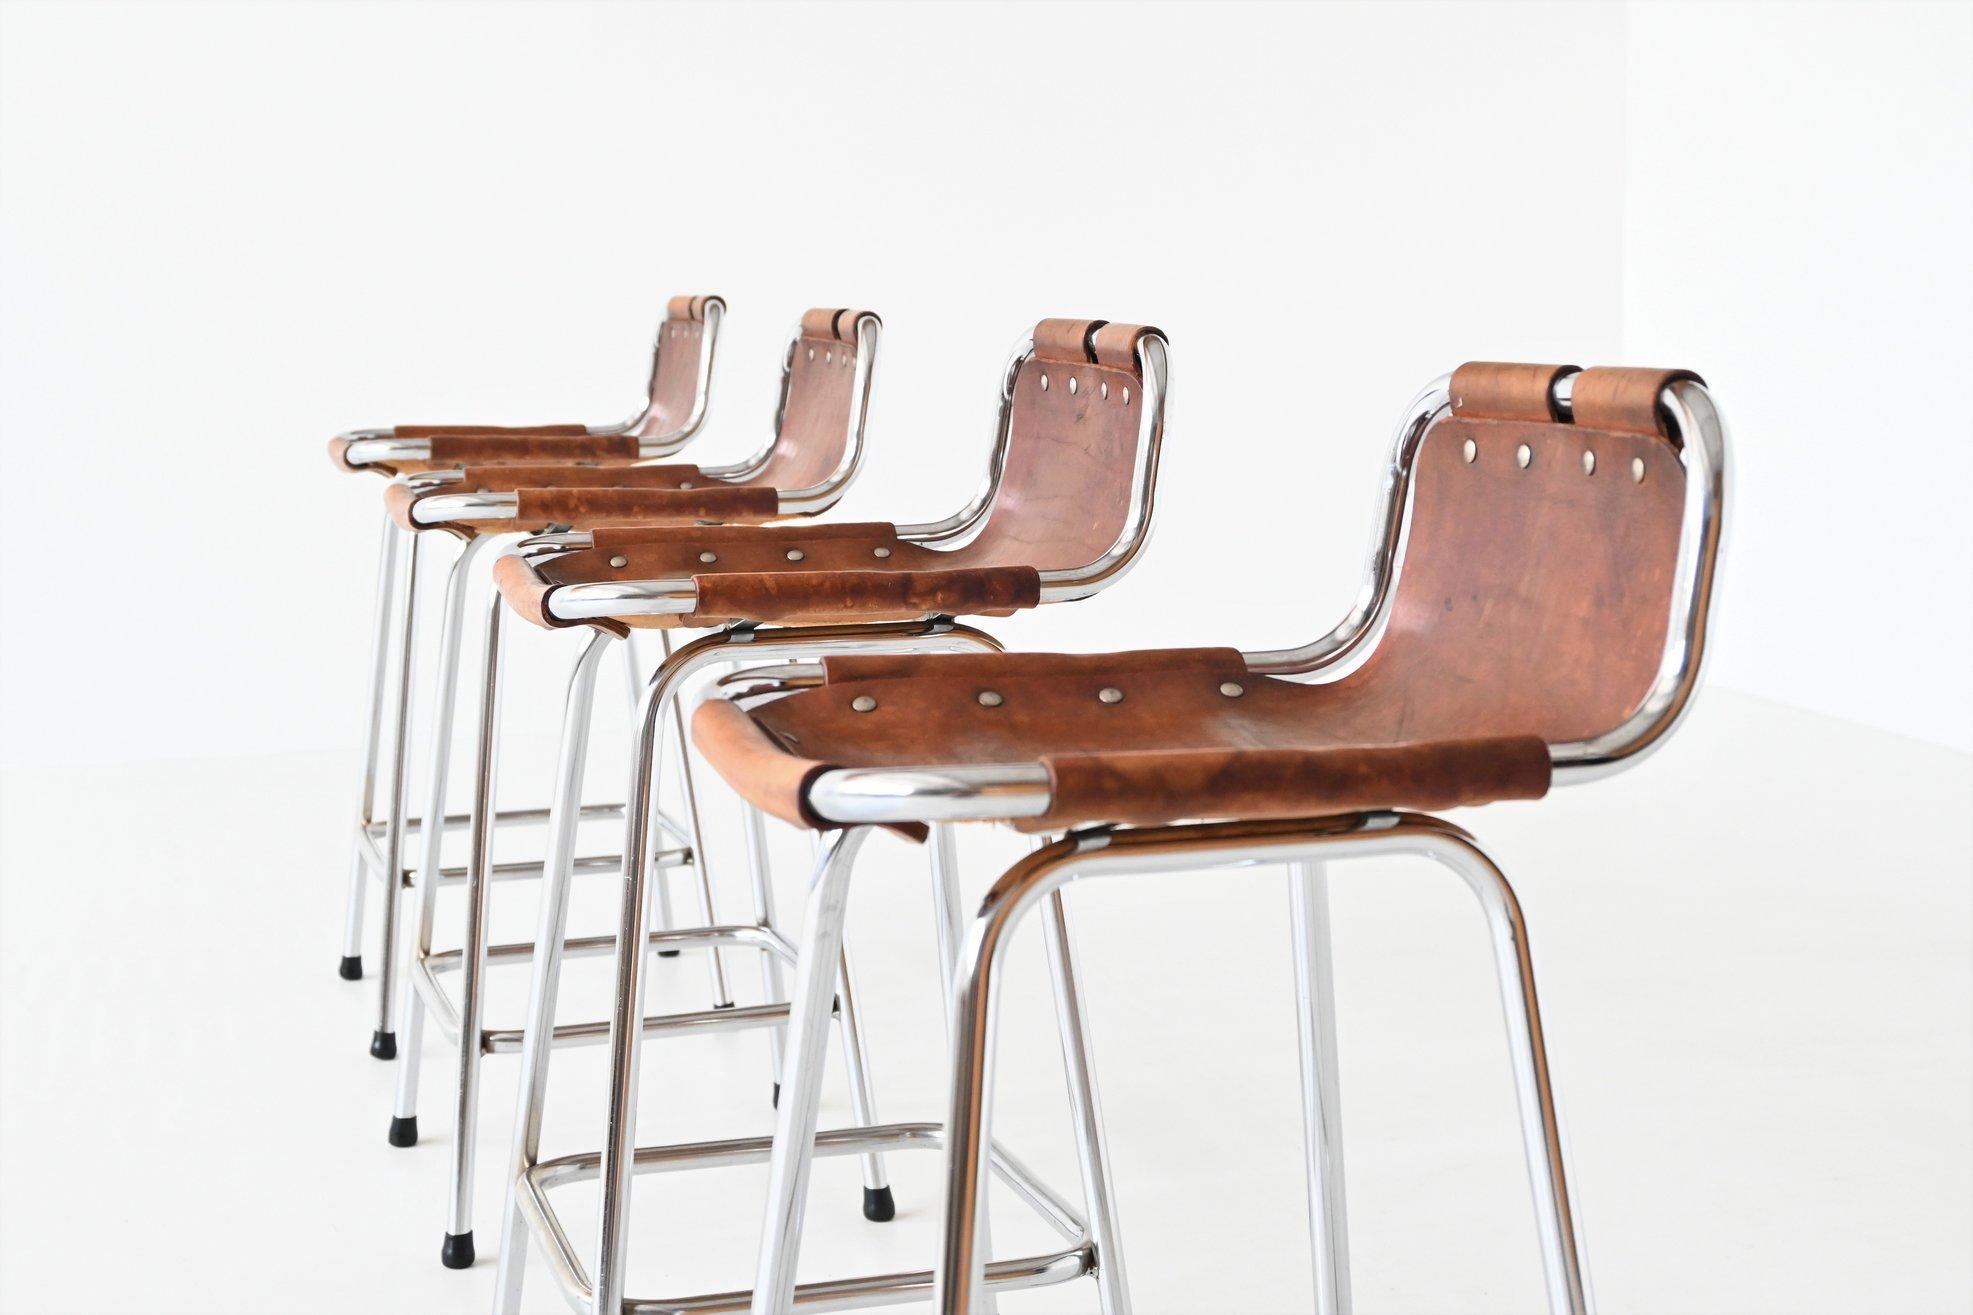 Very nice set of four beautiful shaped low bar stools used by Charlotte Perriand for Les Arcs ski resort, France 1960. The stools have chrome plated tubular metal frames and thick natural saddle leather seats with a nice patina of usage. They are